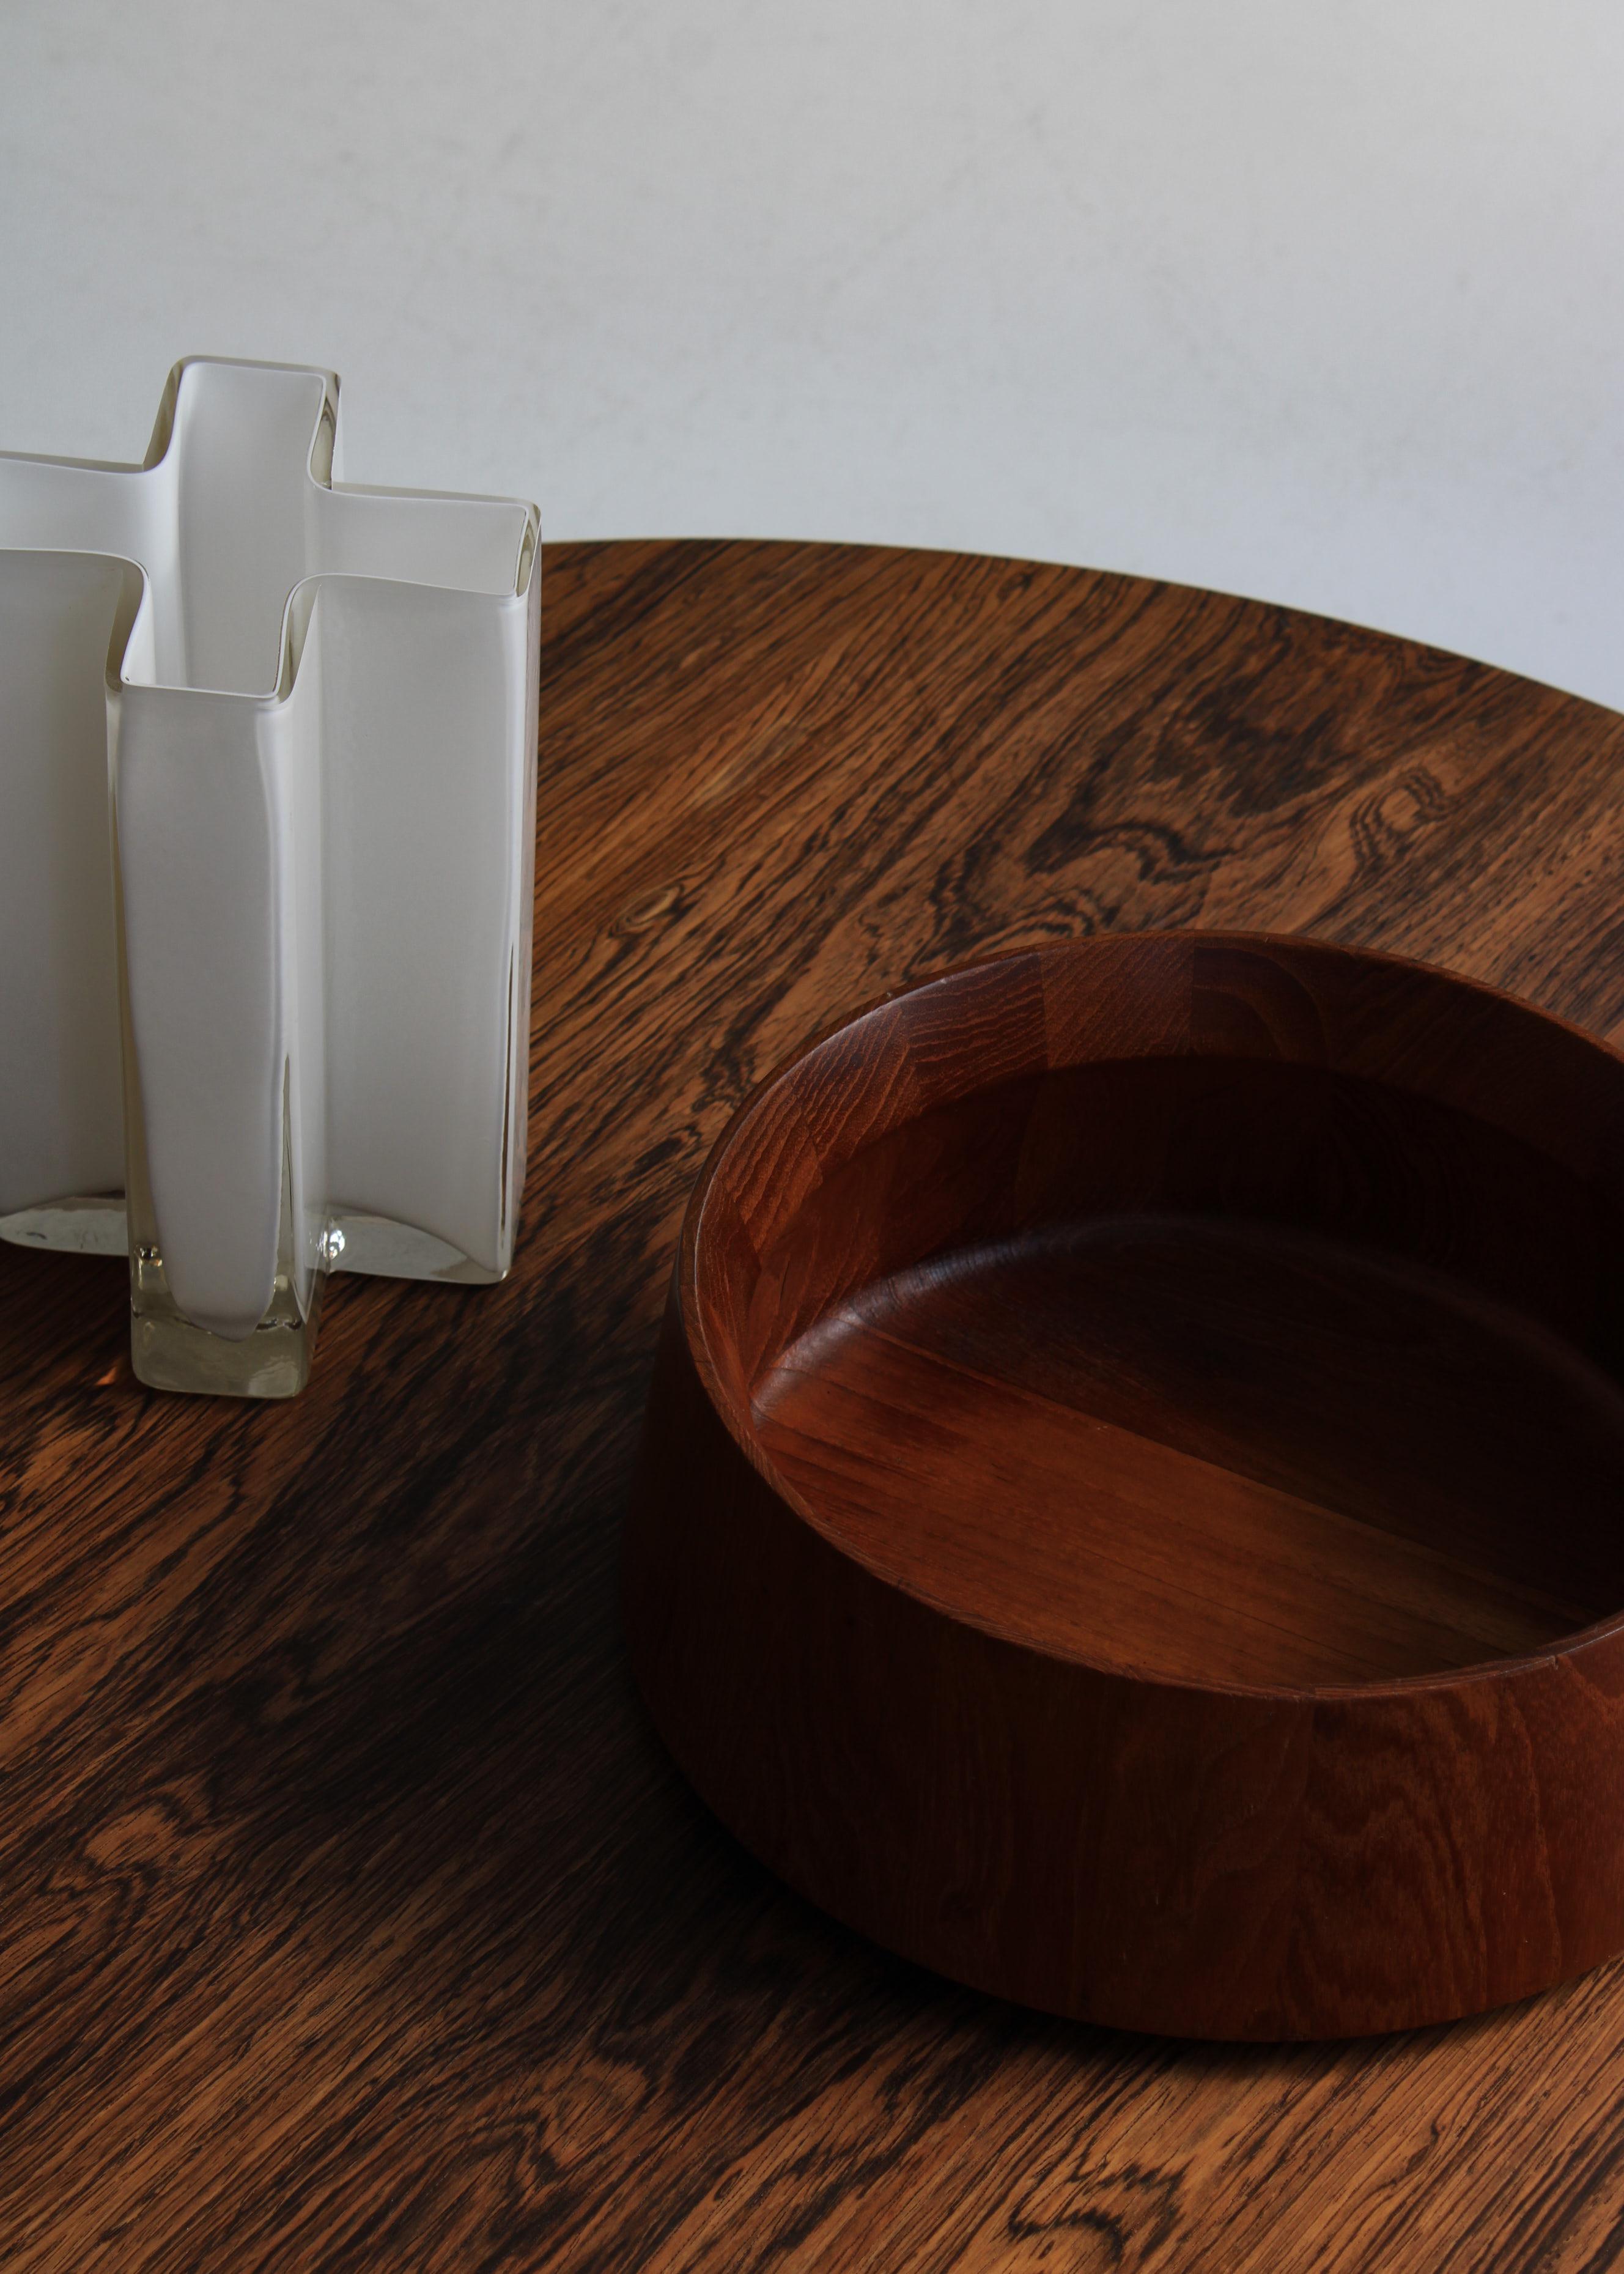 Large teakwood bowl by Danish designer Jens Harald Quistgaard / IHQ. Produced by Quistgaards own company 